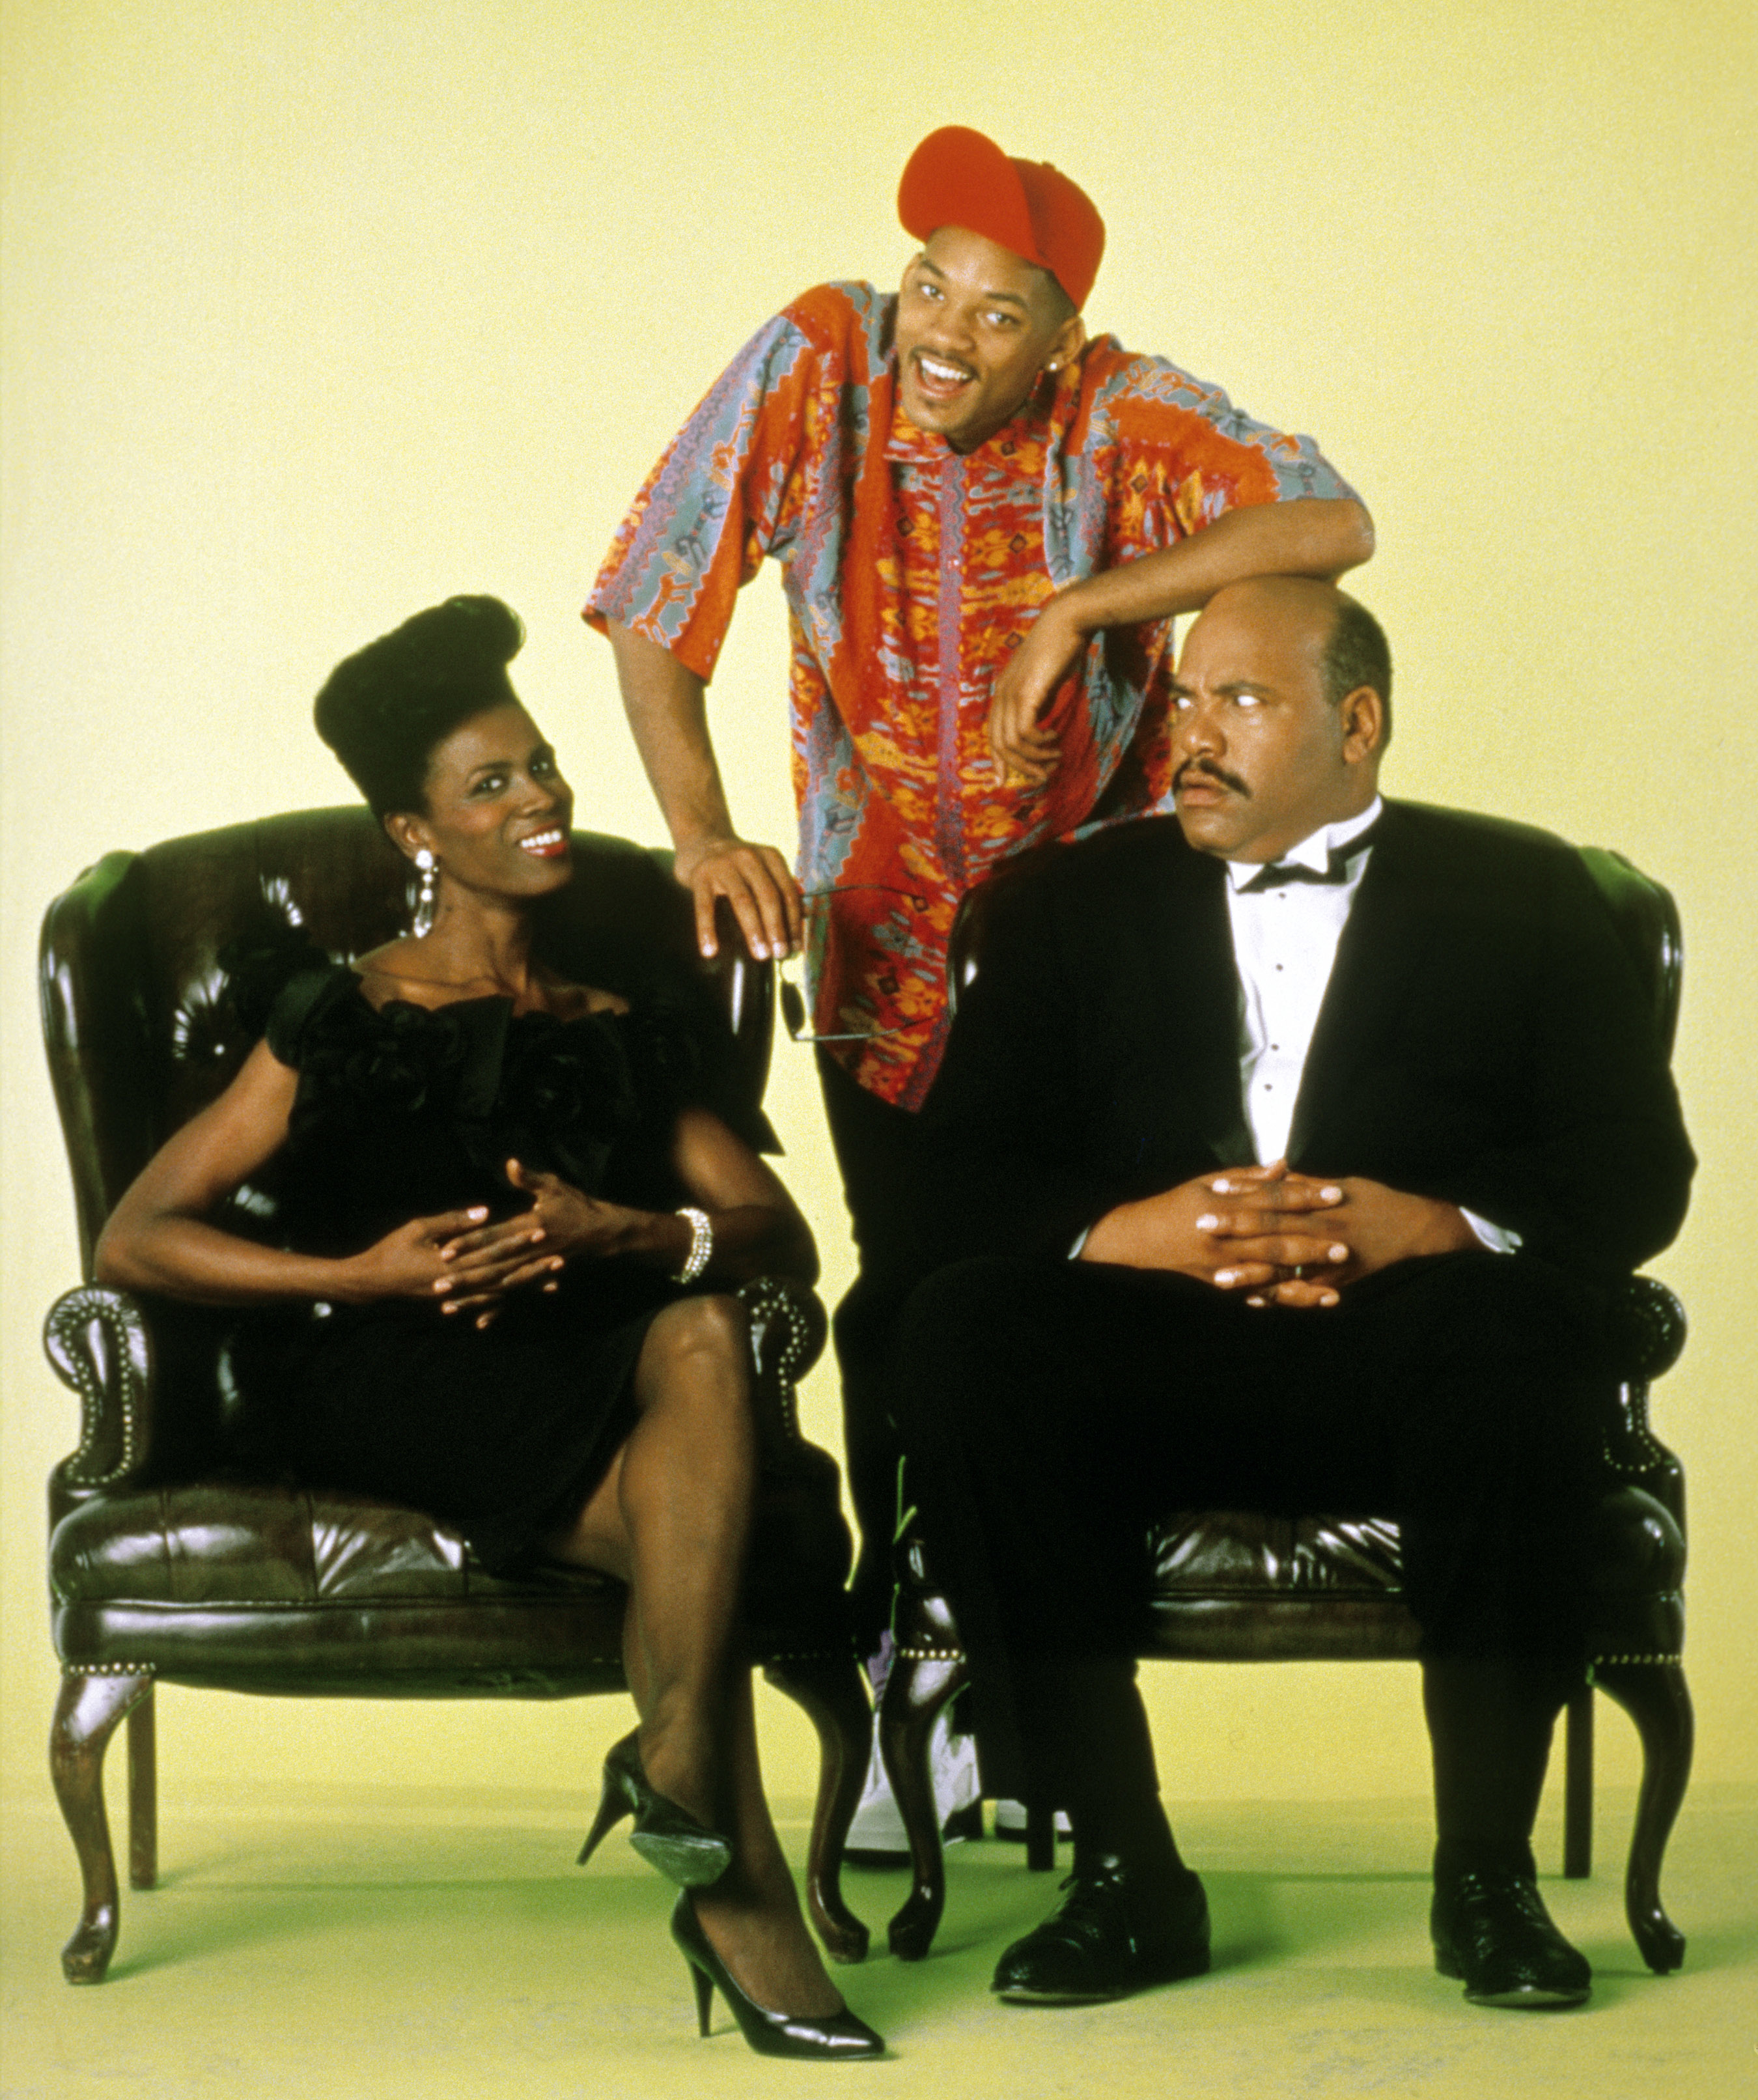 Three characters from &quot;The Fresh Prince of Bel-Air&quot; in a promotional photo, posing humorously with one standing, one seated, and one leaning